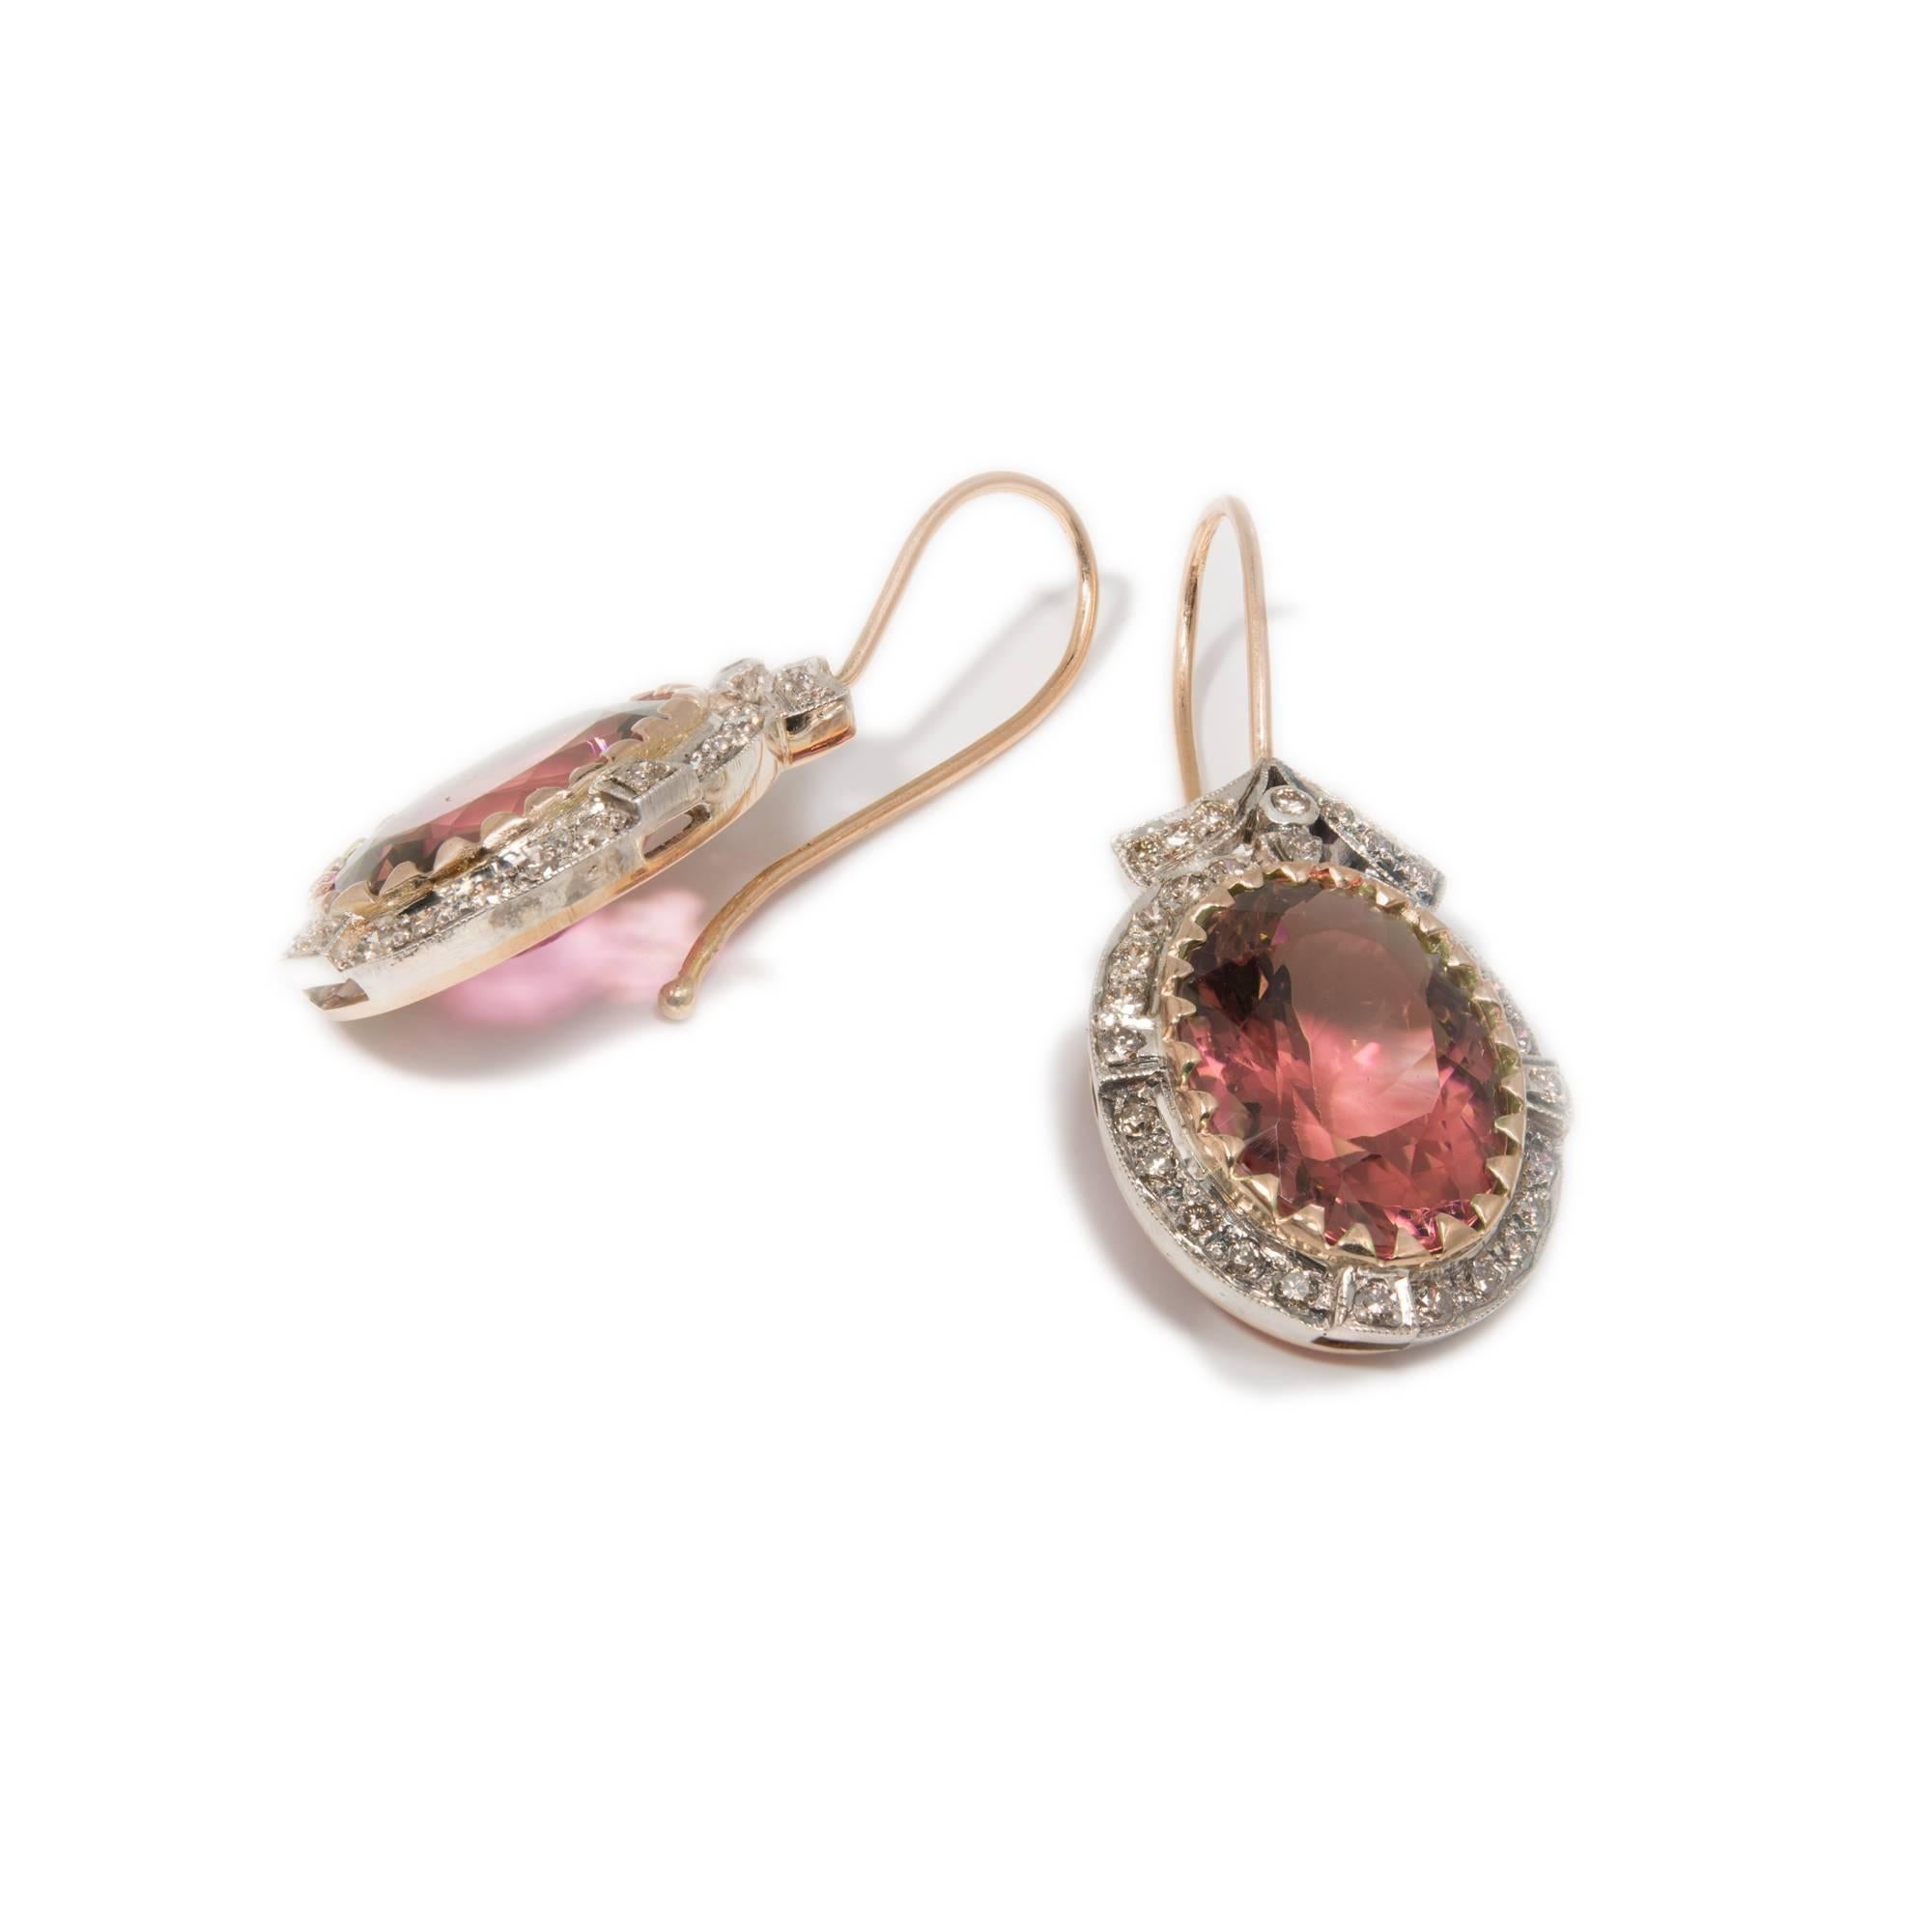 Handmade pendant earrings circa 1900. Silver top on 18k rose gold base and wire. Bright top light brown diamonds with a slight pinkish brown tint are a perfect match for the bright pink large oval Tourmalines. 

2 oval bright pink Tourmaline,